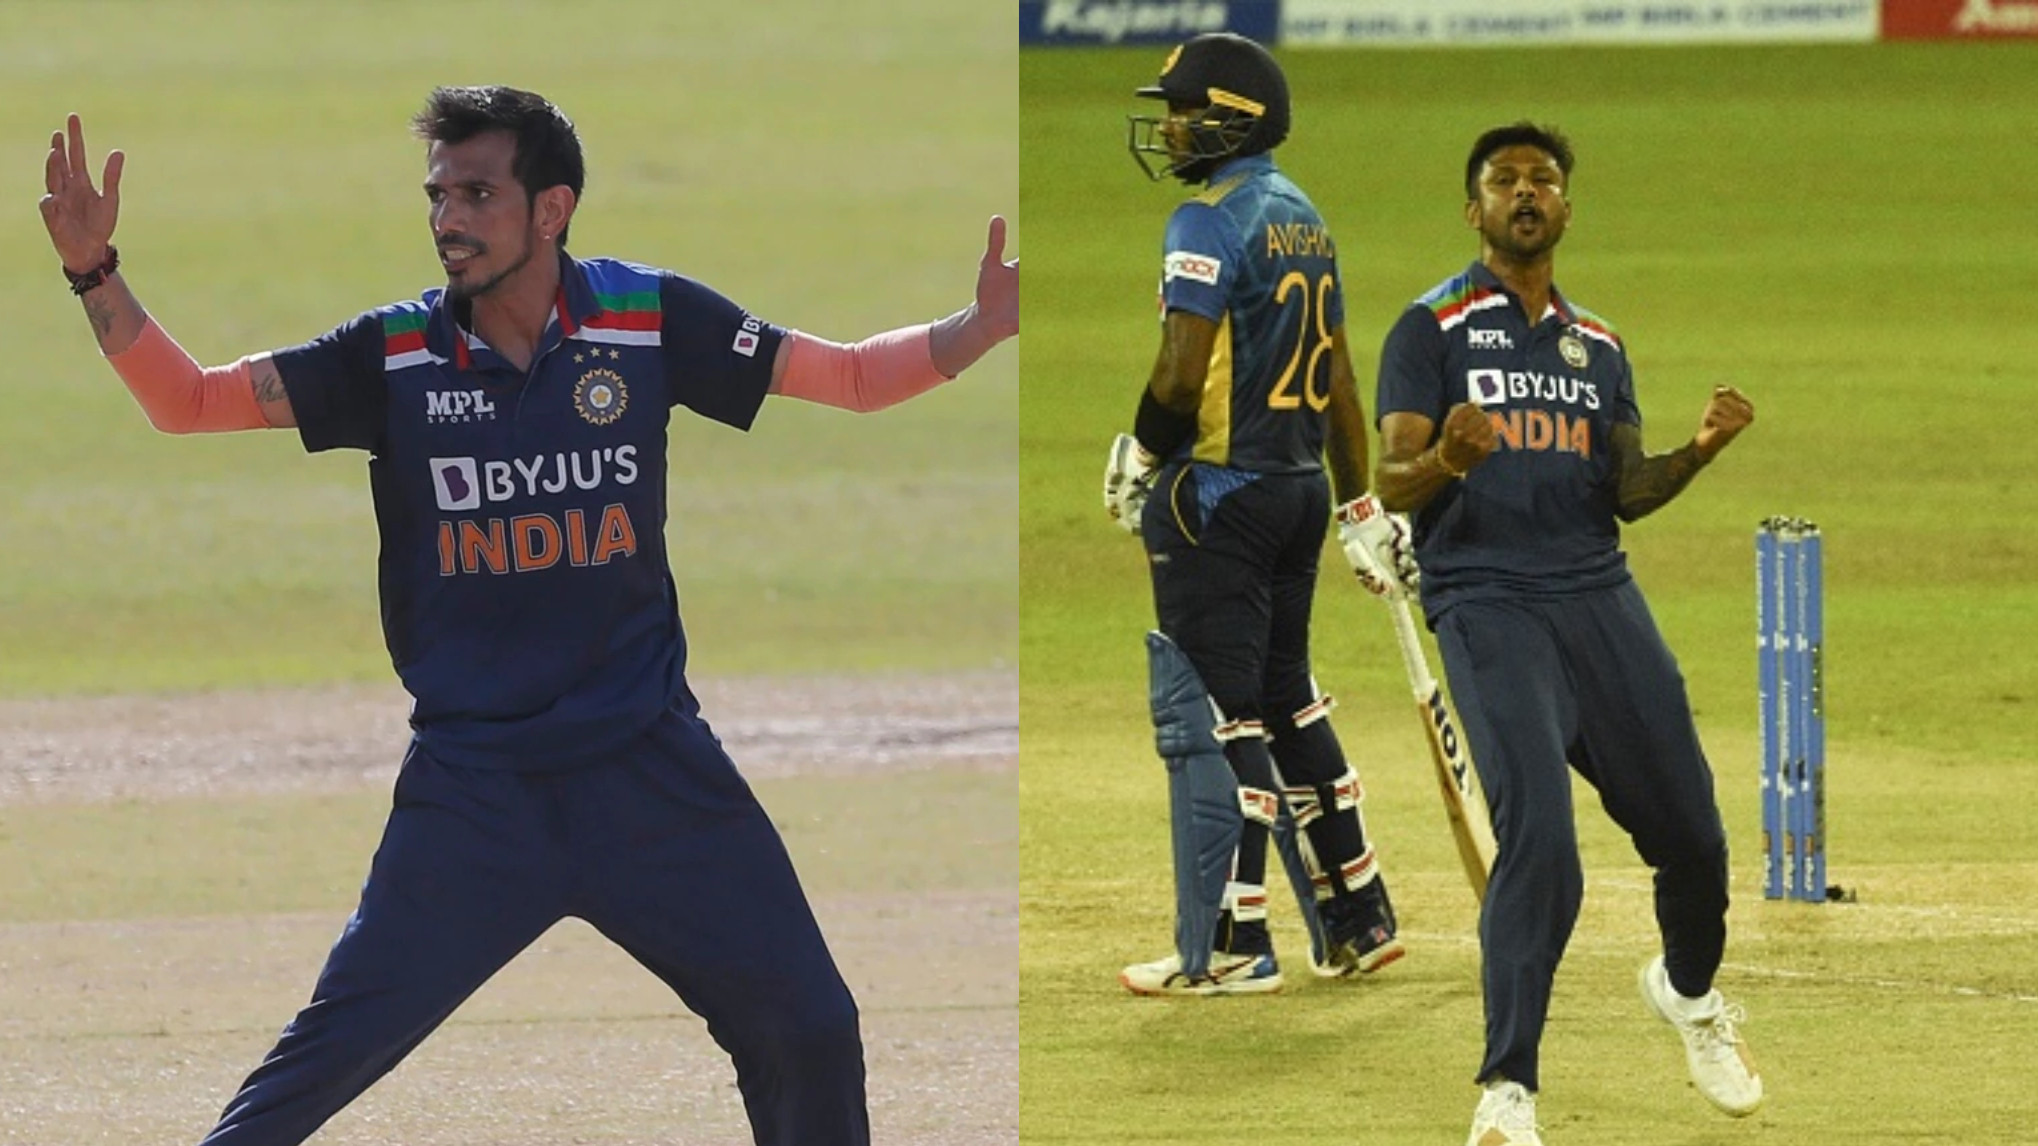 SL v IND 2021: Yuzvendra Chahal and K Gowtham test COVID-19 positive in Sri Lanka- Report